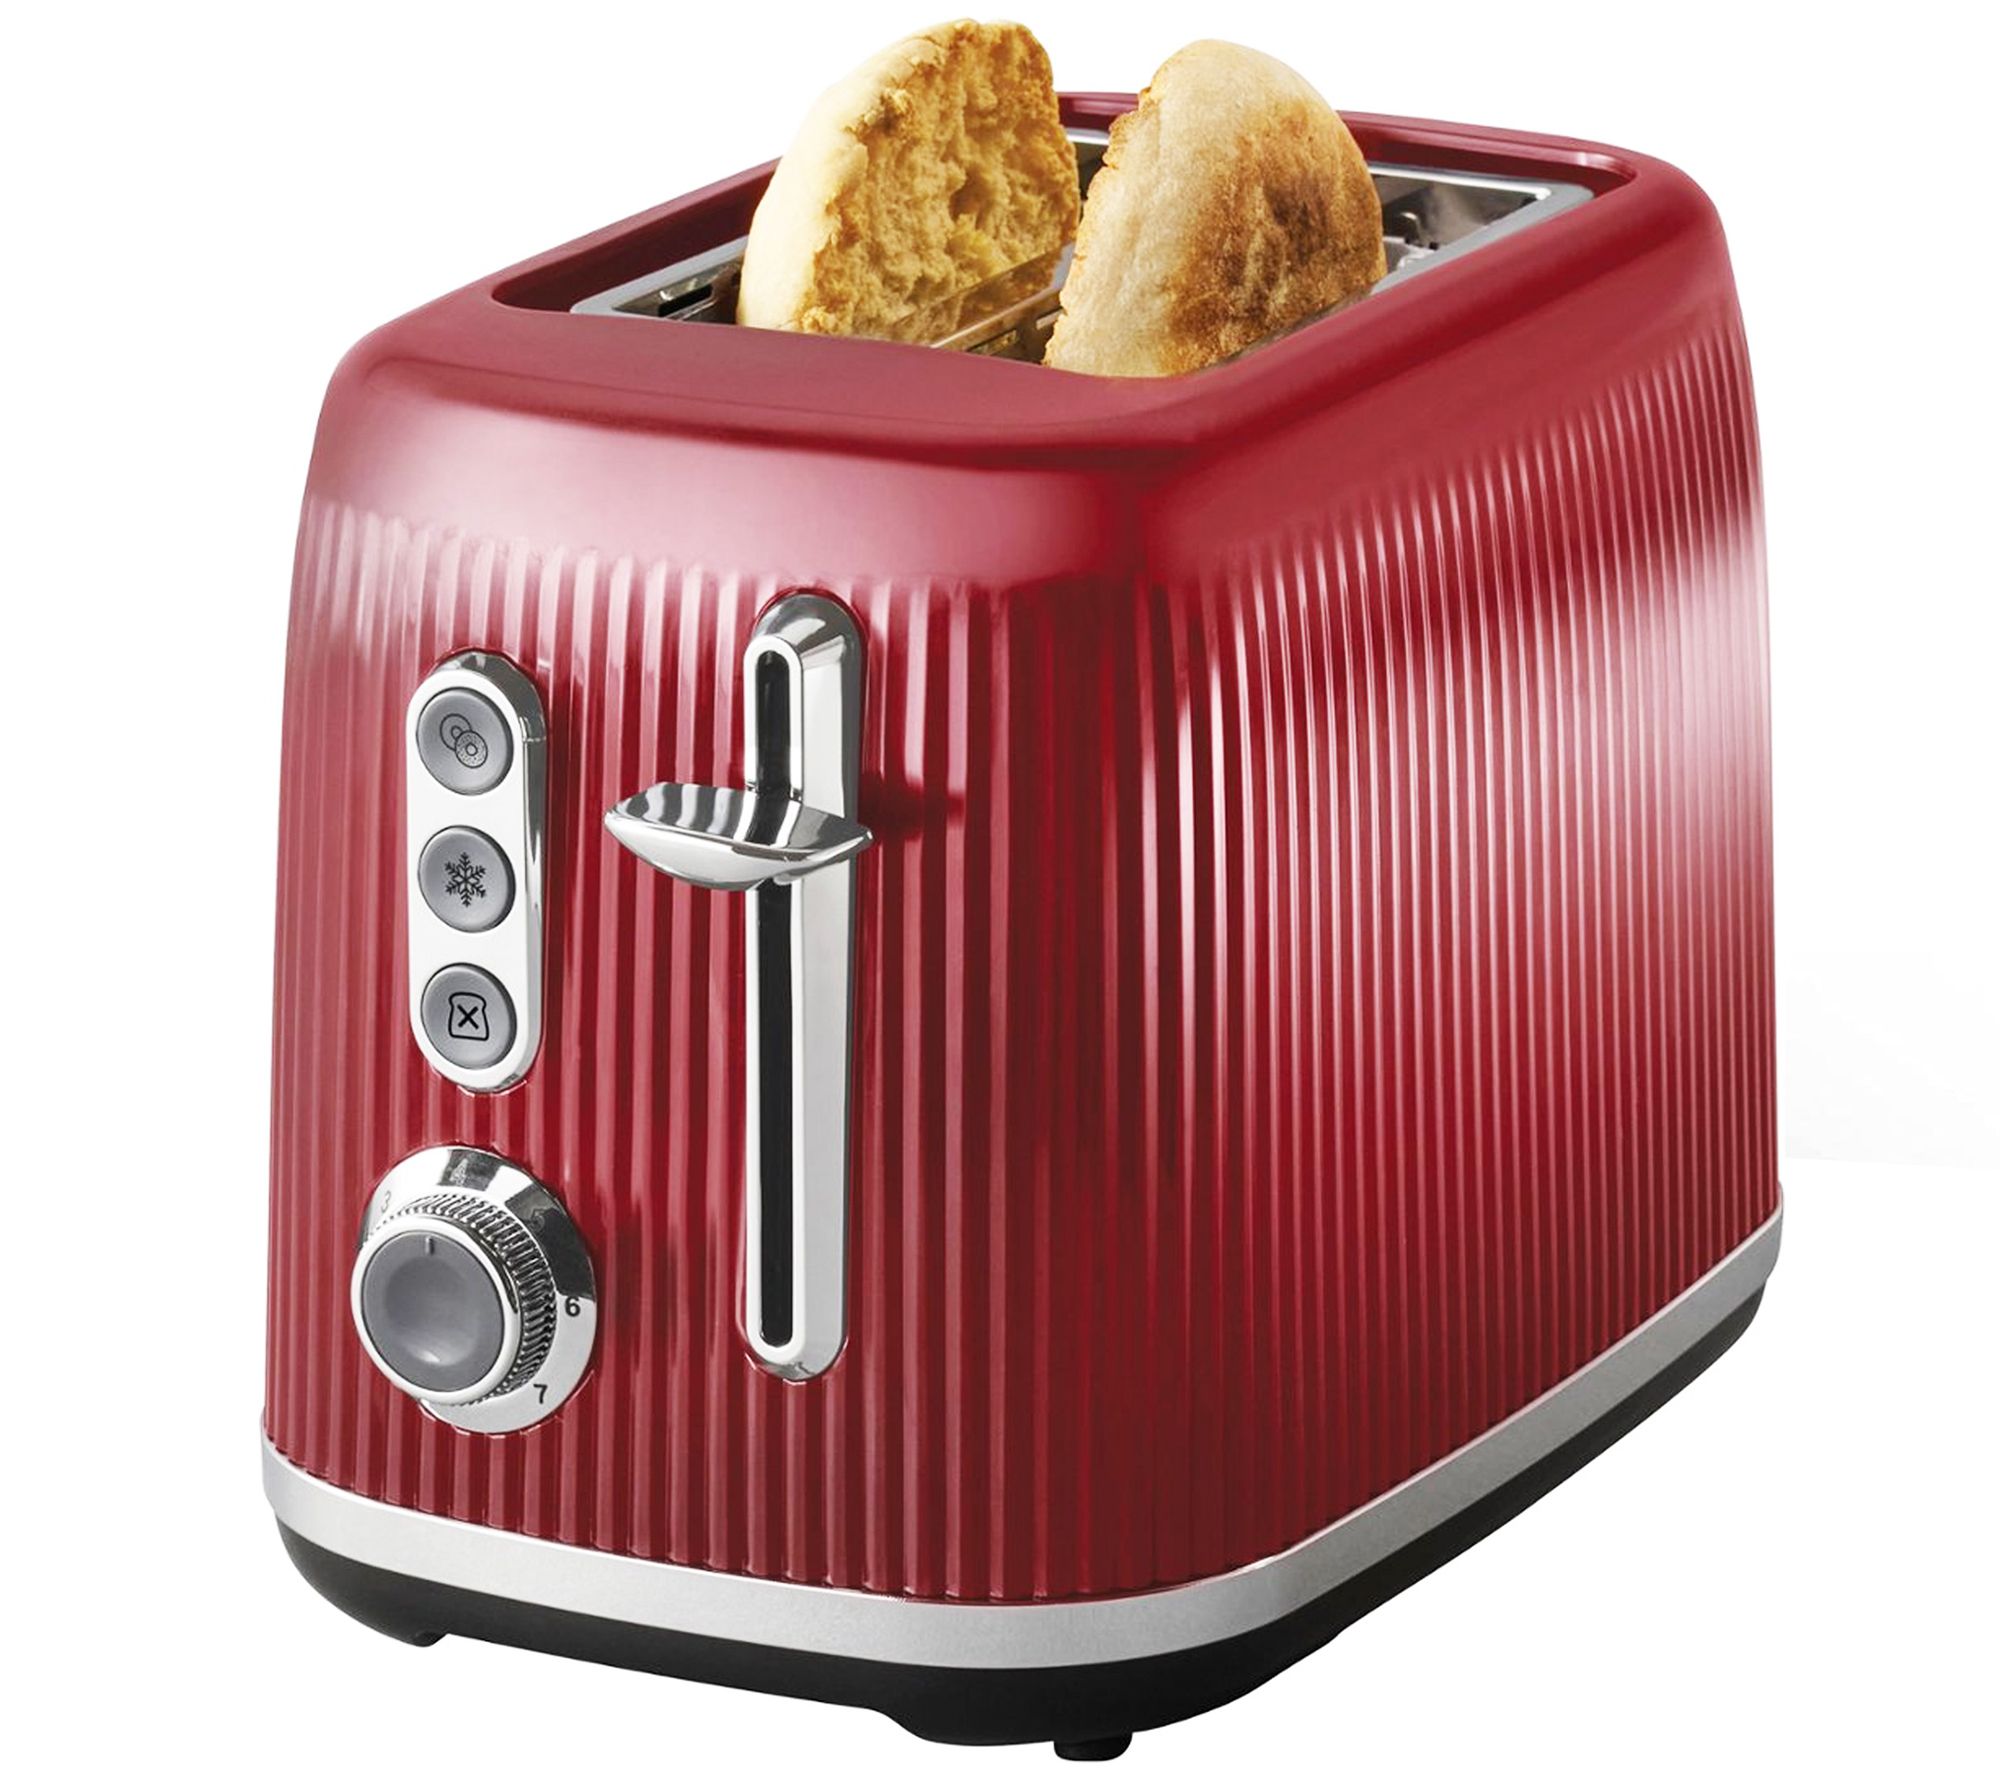 Oster Retro 2-Slice Toaster with Extra Wide Slots 